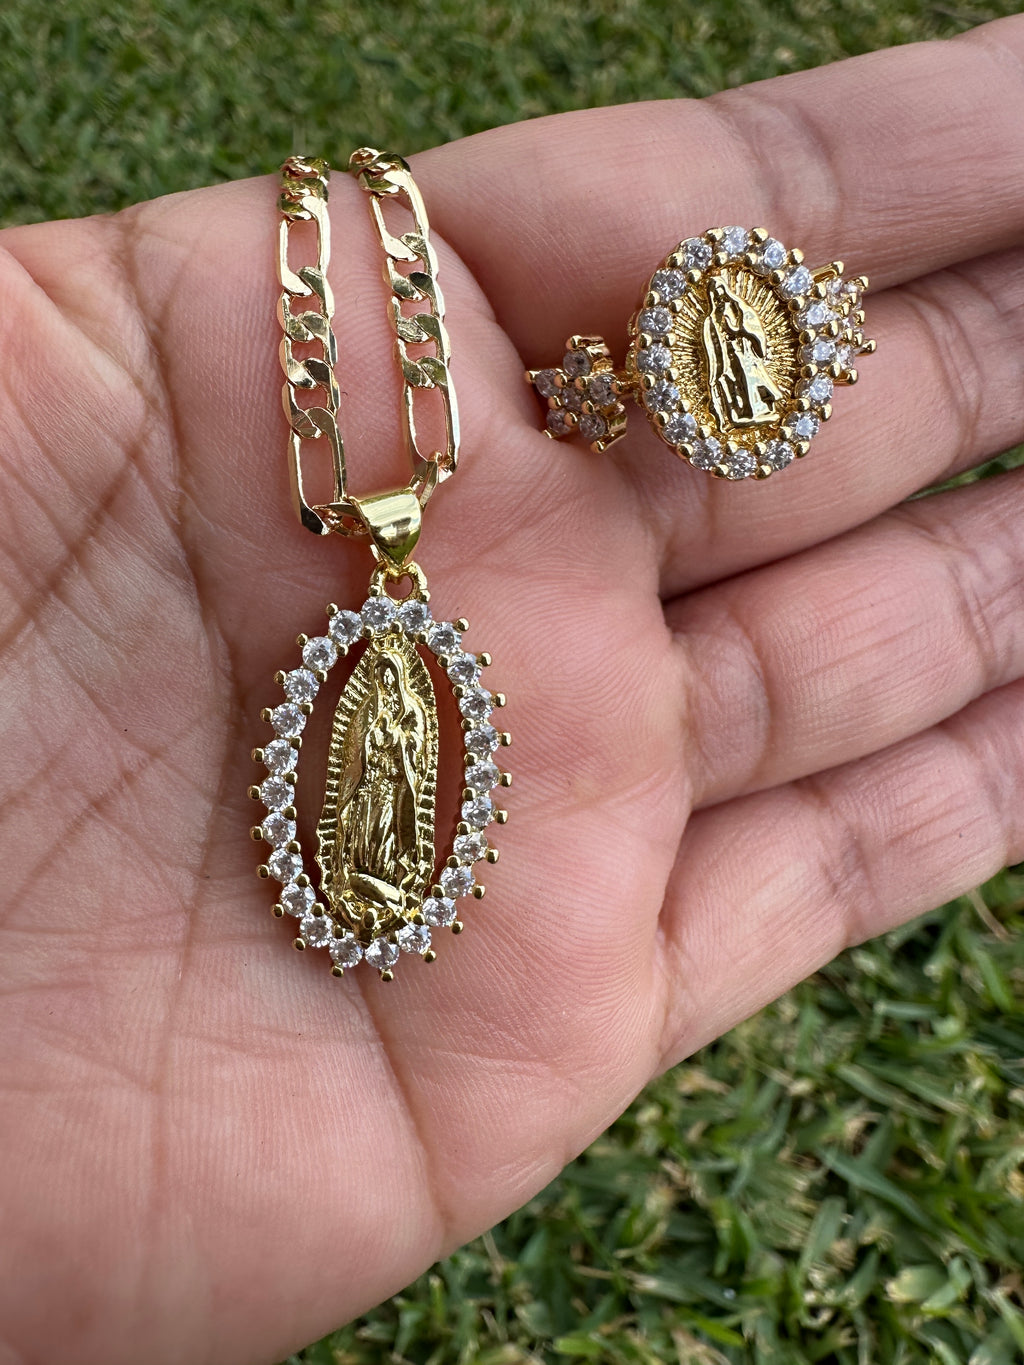 “Our Lady” Necklace and Ring Set -Virgencita Necklace Set - Virgin Jewelry Set